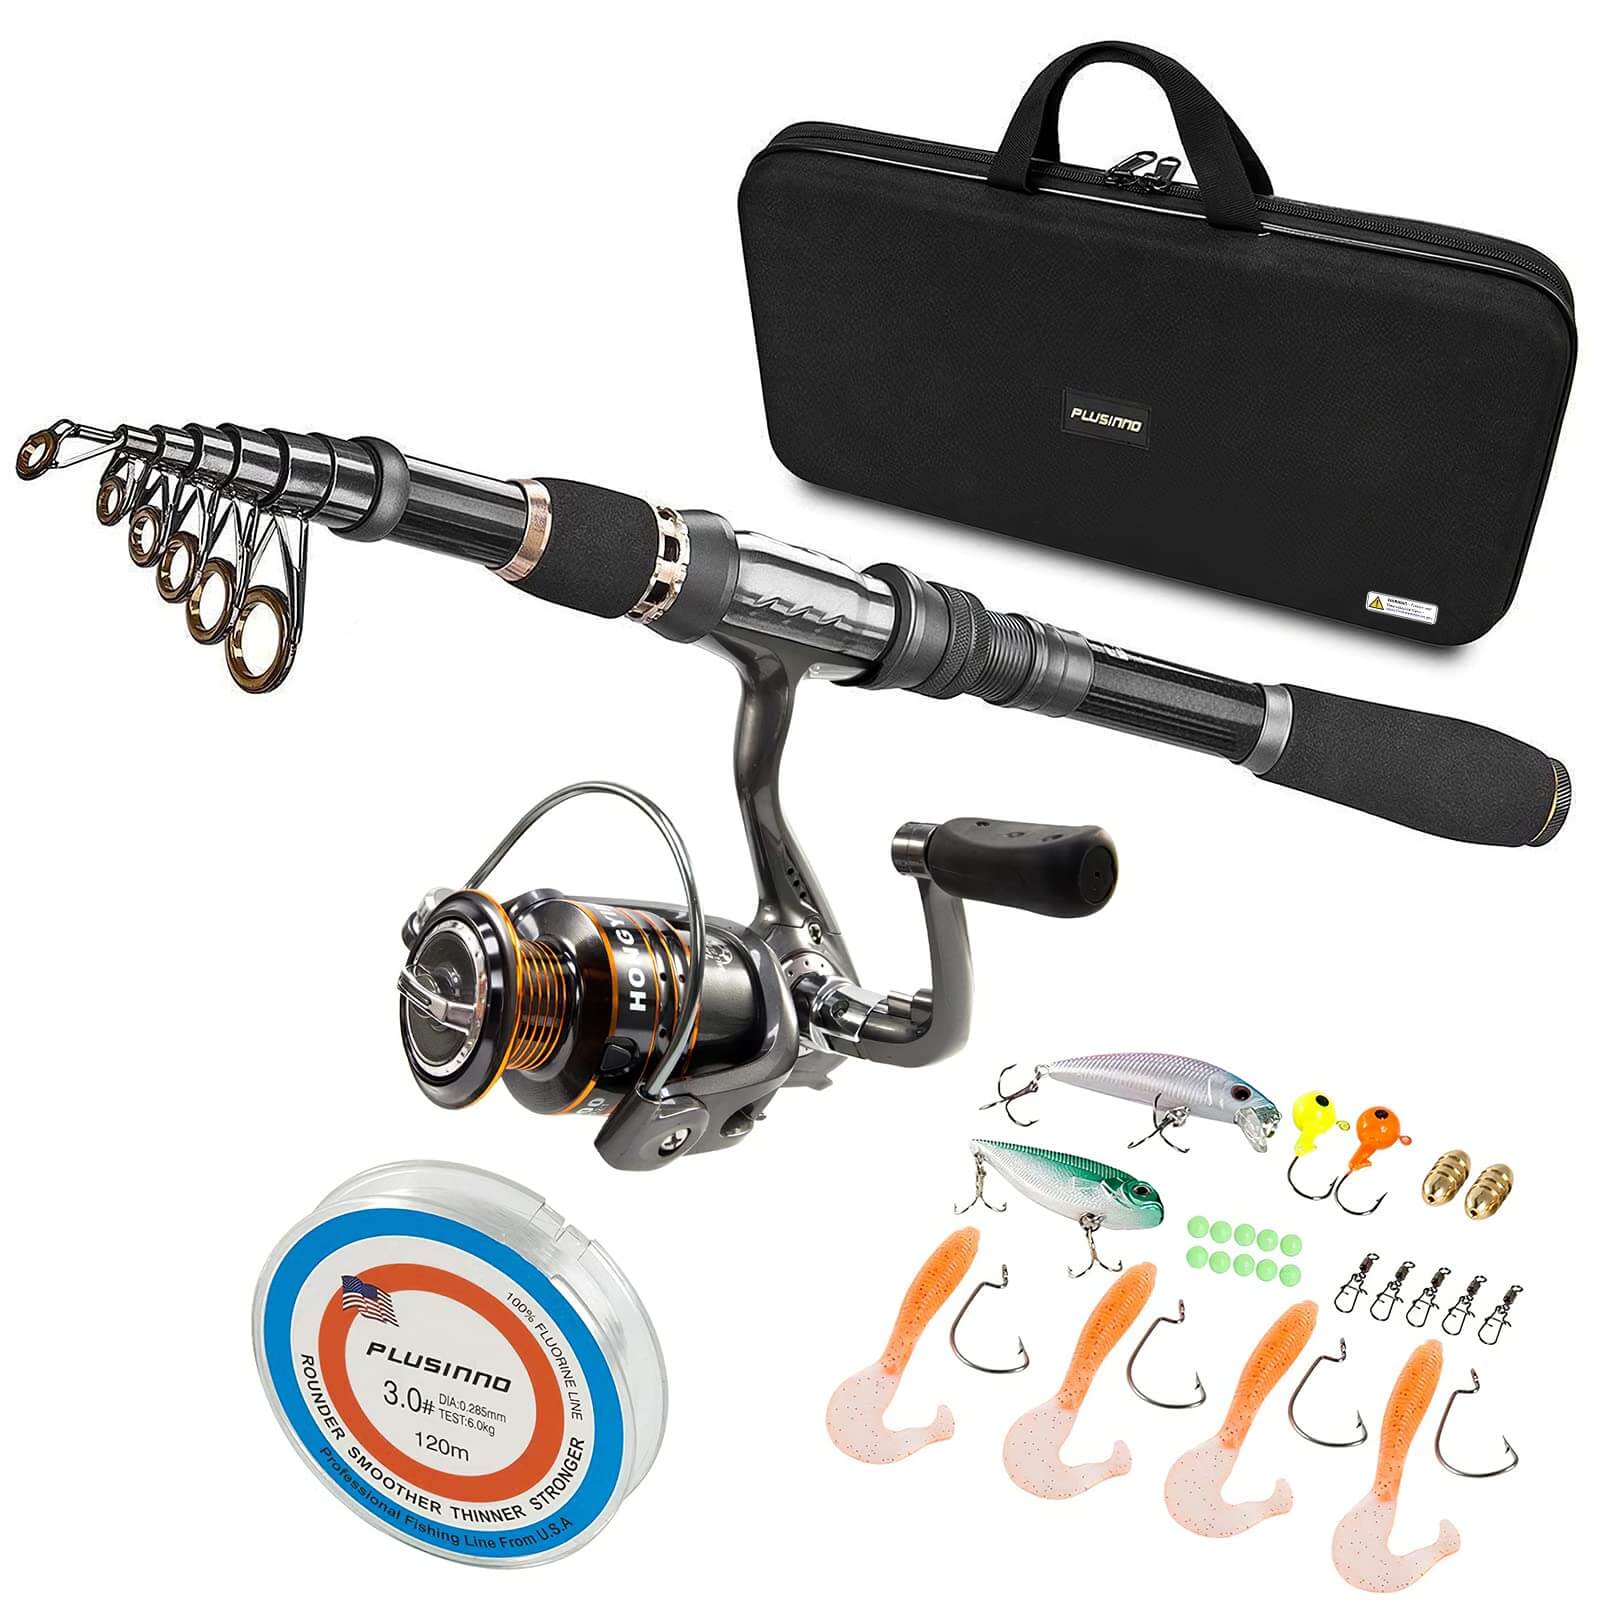 PLUSINNO Eagle Hunting Ⅱ Telescopic Fishing Rods and Reel Combos with Carrier Case